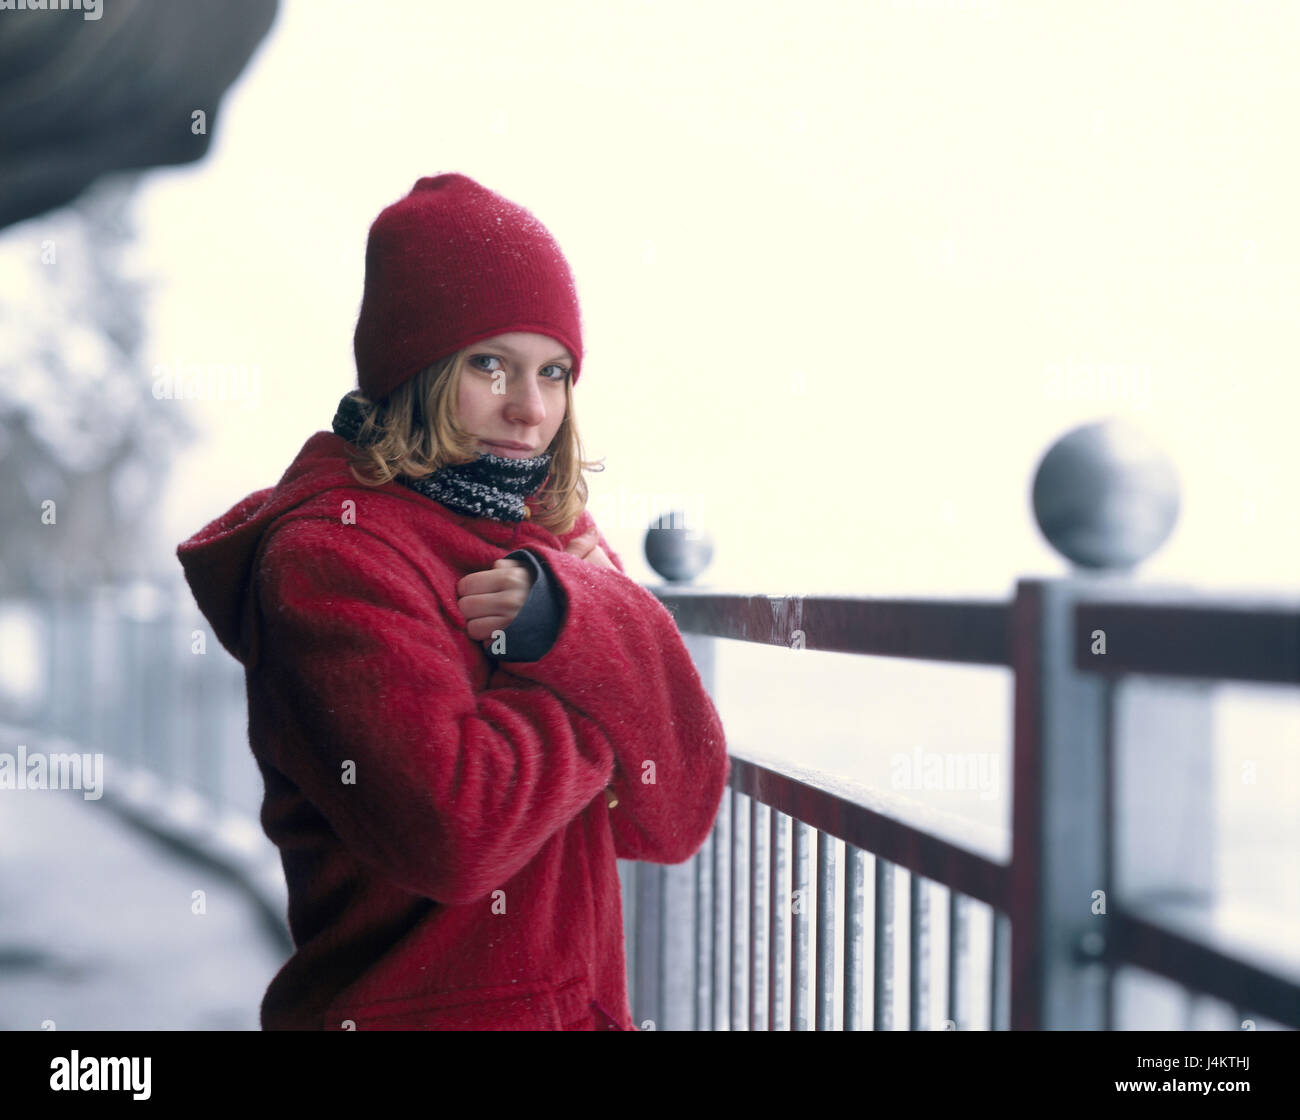 Balustrades, woman, young, winter clothes red, half portrait 20-30 years, Jung-limited, winter casing, casing, cap, headgear, view camera, conception, loneliness, only, cold, freeze, chilly, frosty, uncomfortable, winter walk, winter Stock Photo